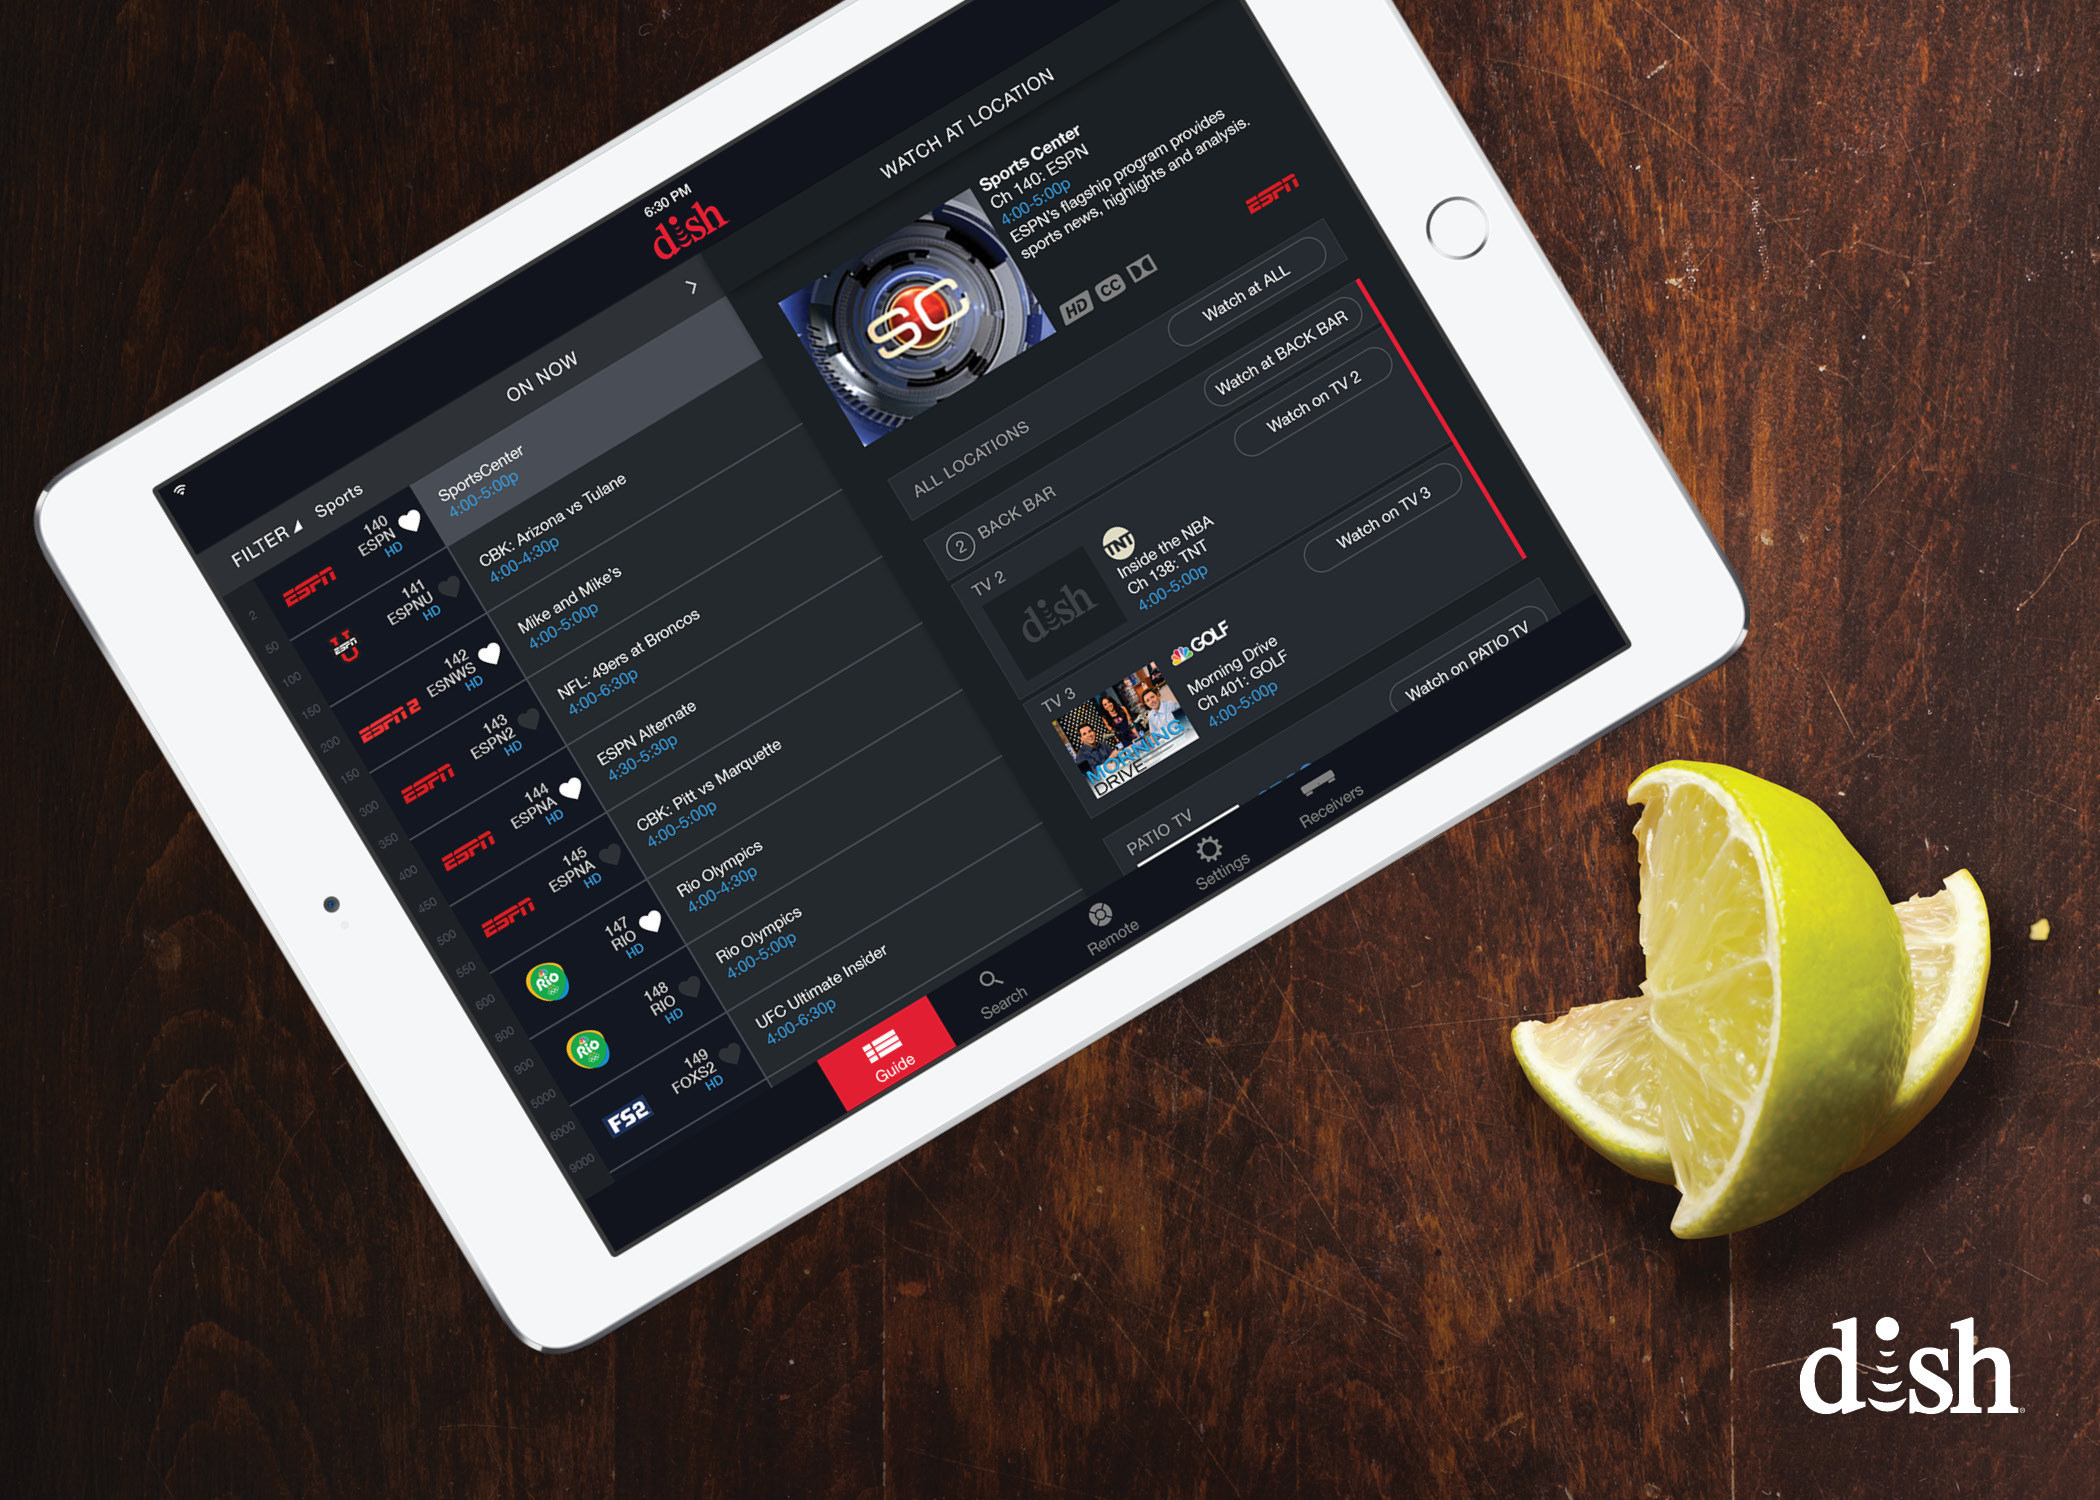 DISH launches new remote app, allows businesses to control multiple TVs